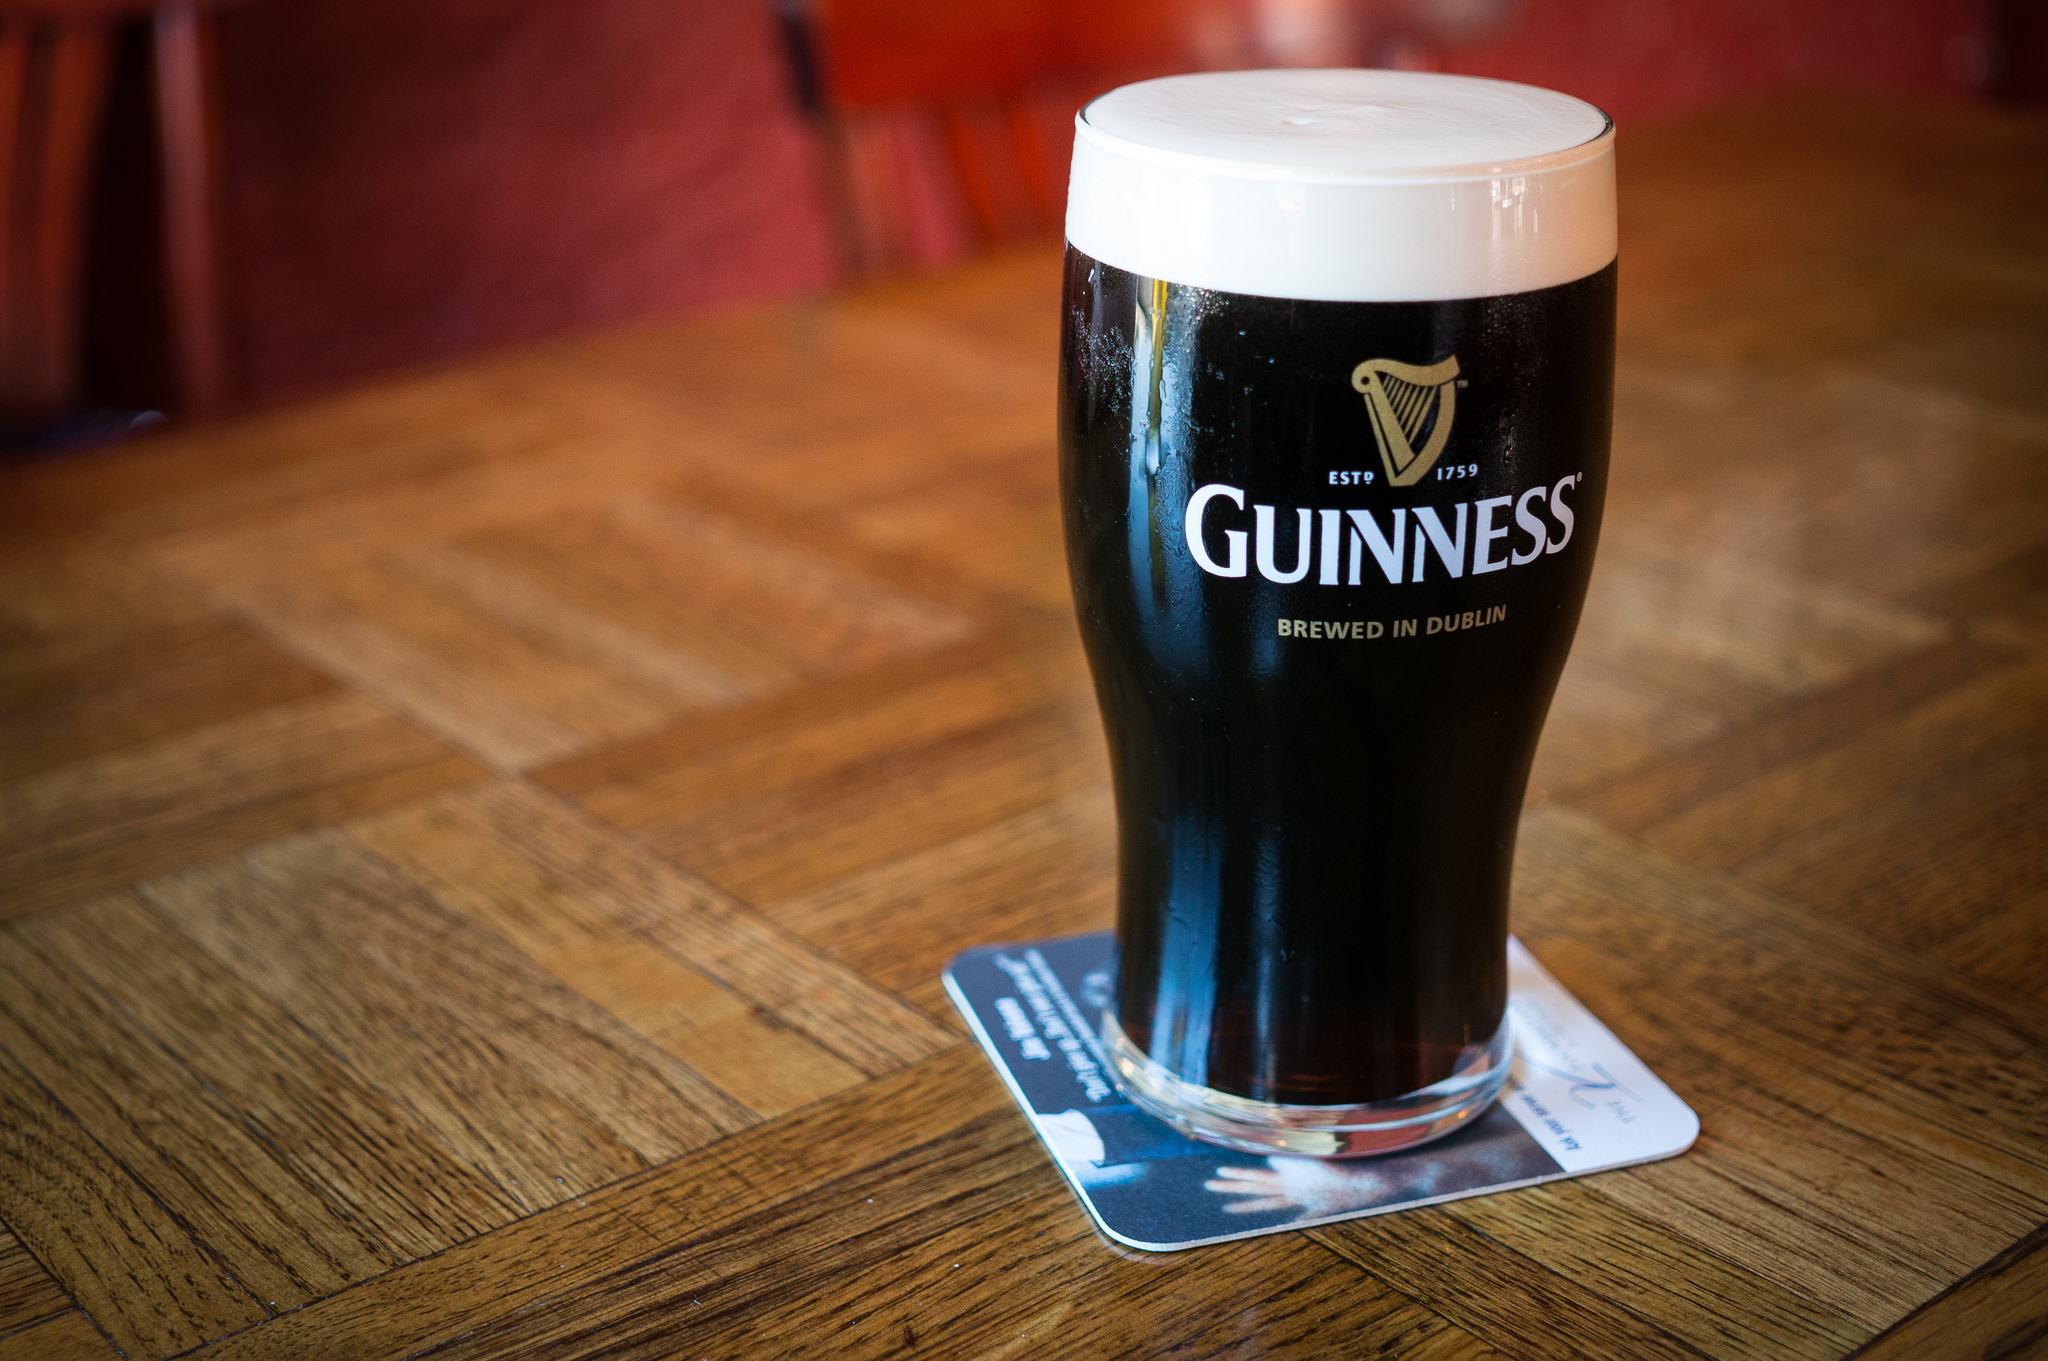 A pint of Guinness | Photo credit: Aaron Hockley